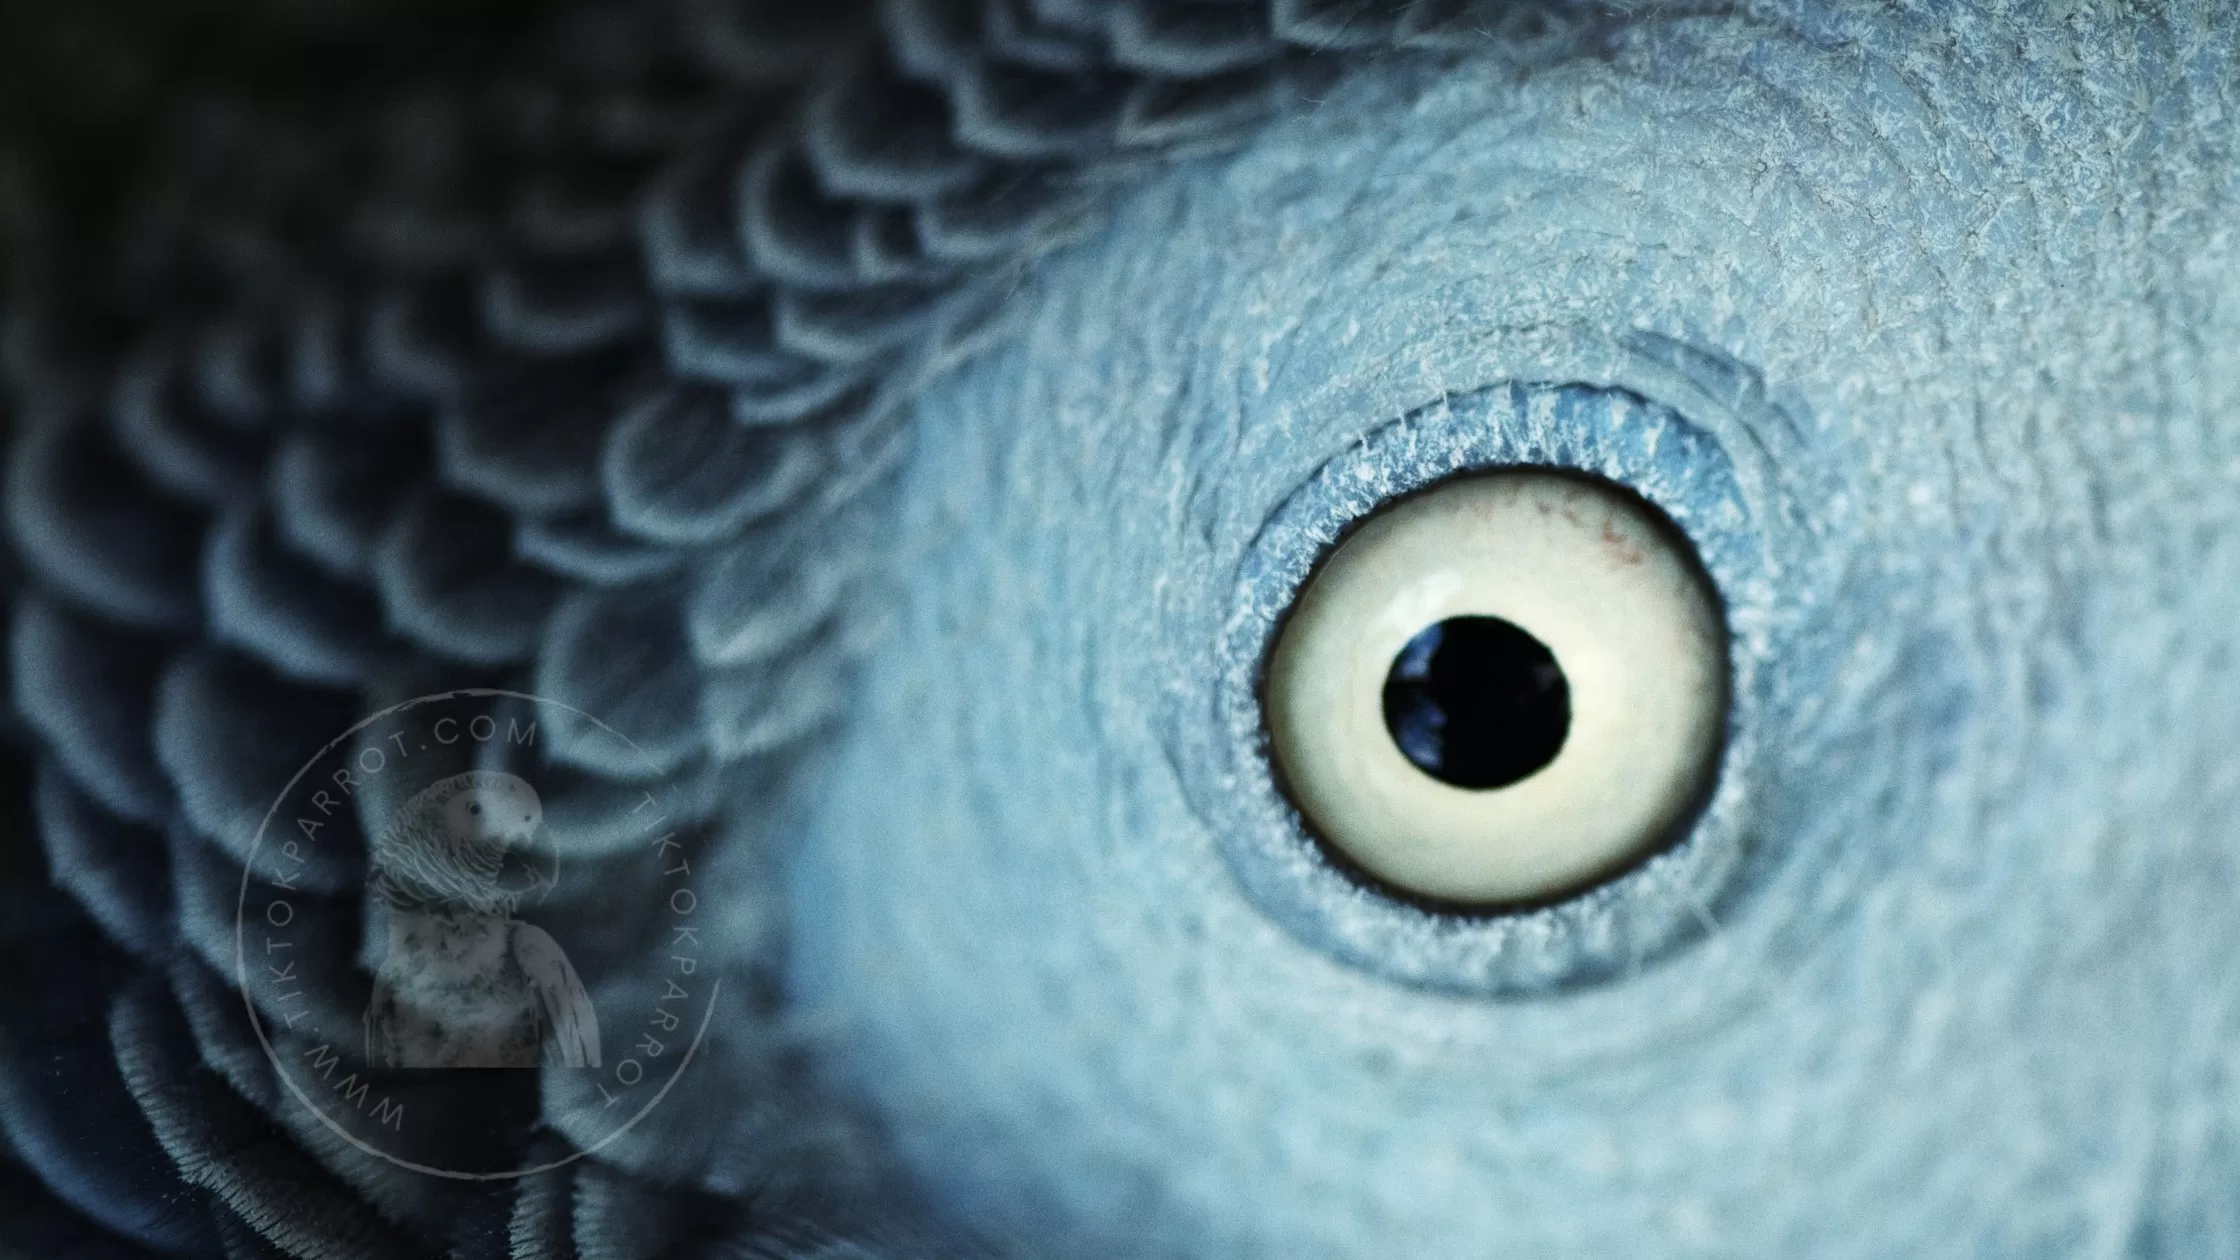 Unlock the Secrets of Choosing the Perfect African Grey Parrot